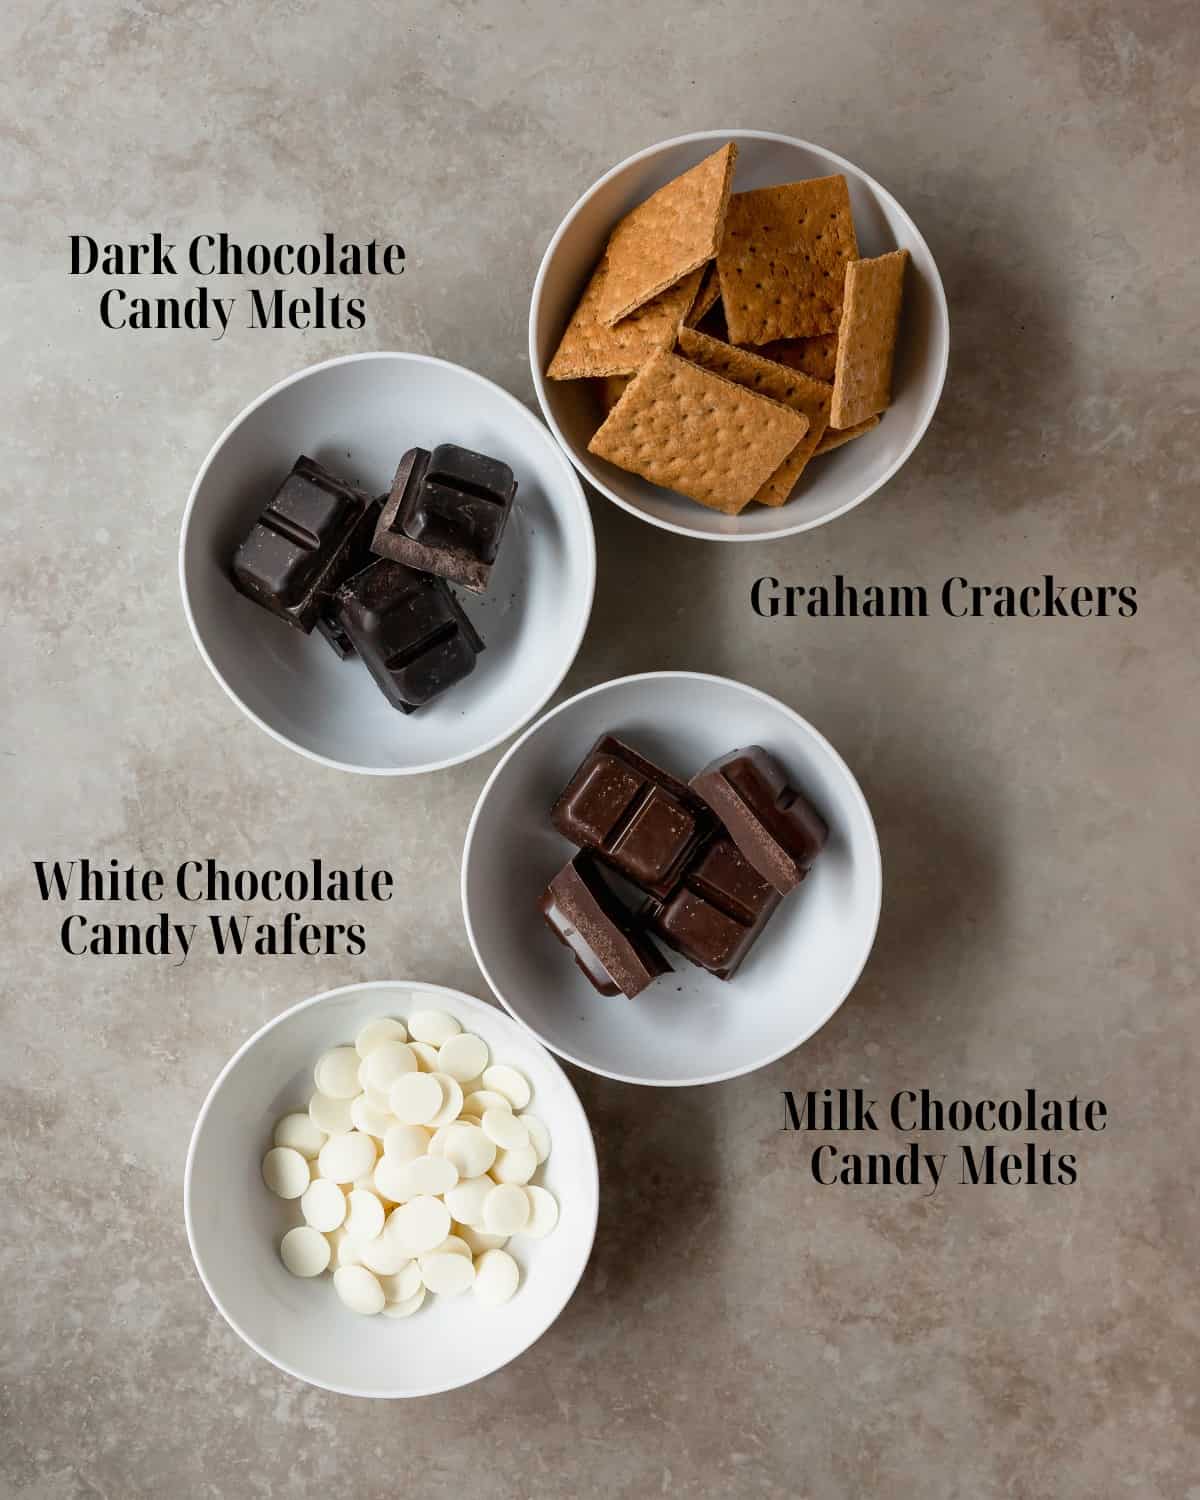 Gather graham crackers, white chocolate, milk chocolate, and dark chocolate melting candies and any toppings you like.